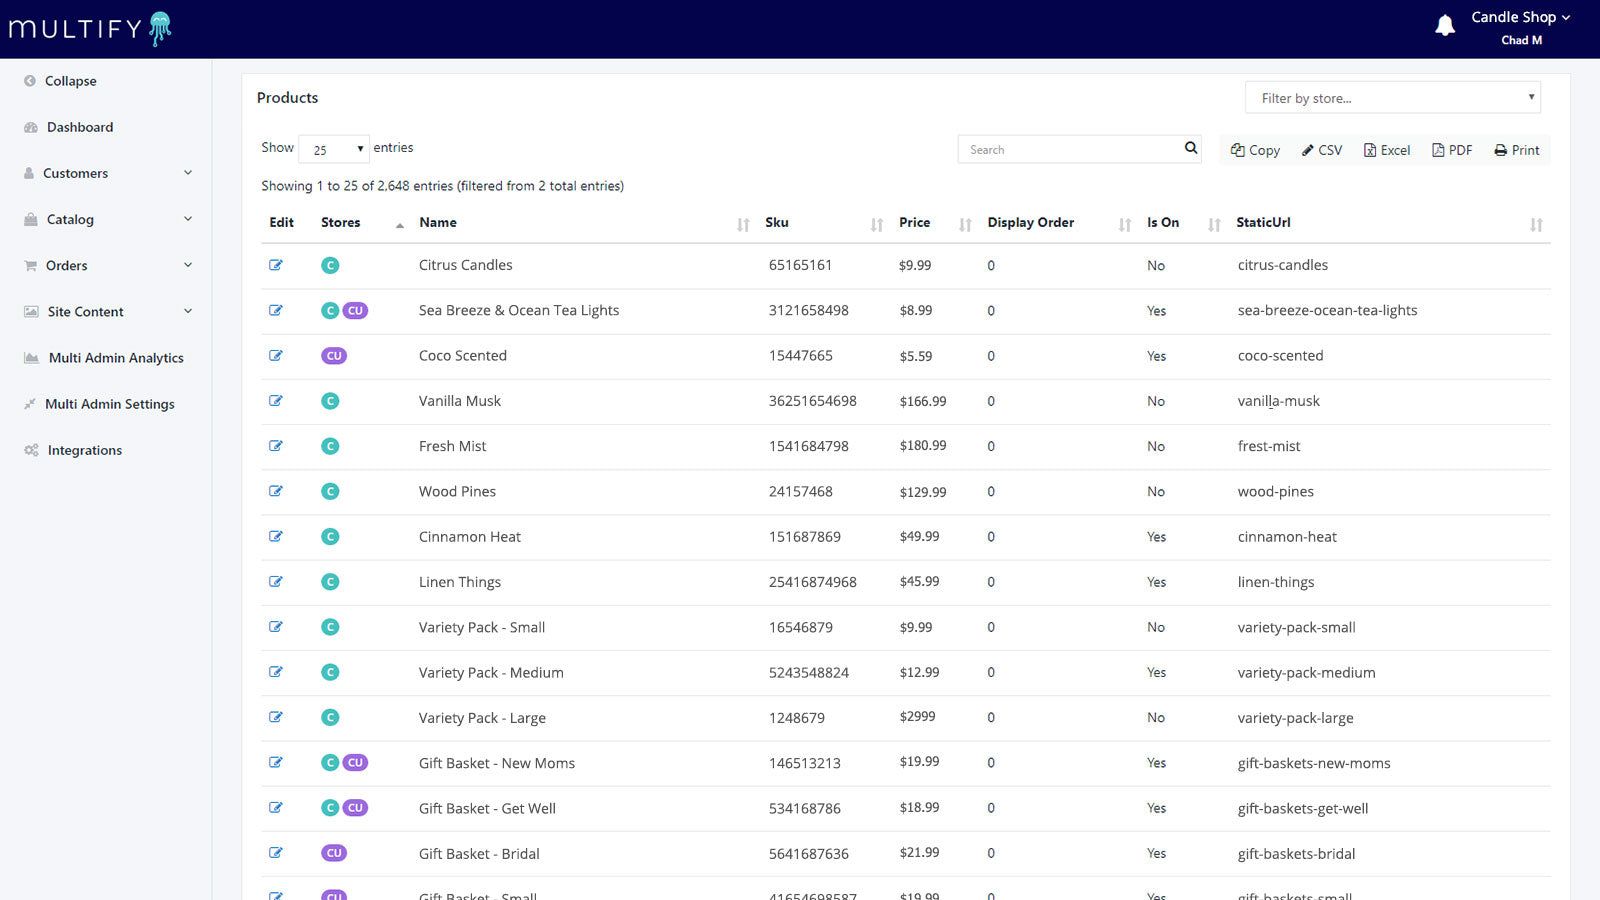 Multi-Admin by Multify products listing screenshot